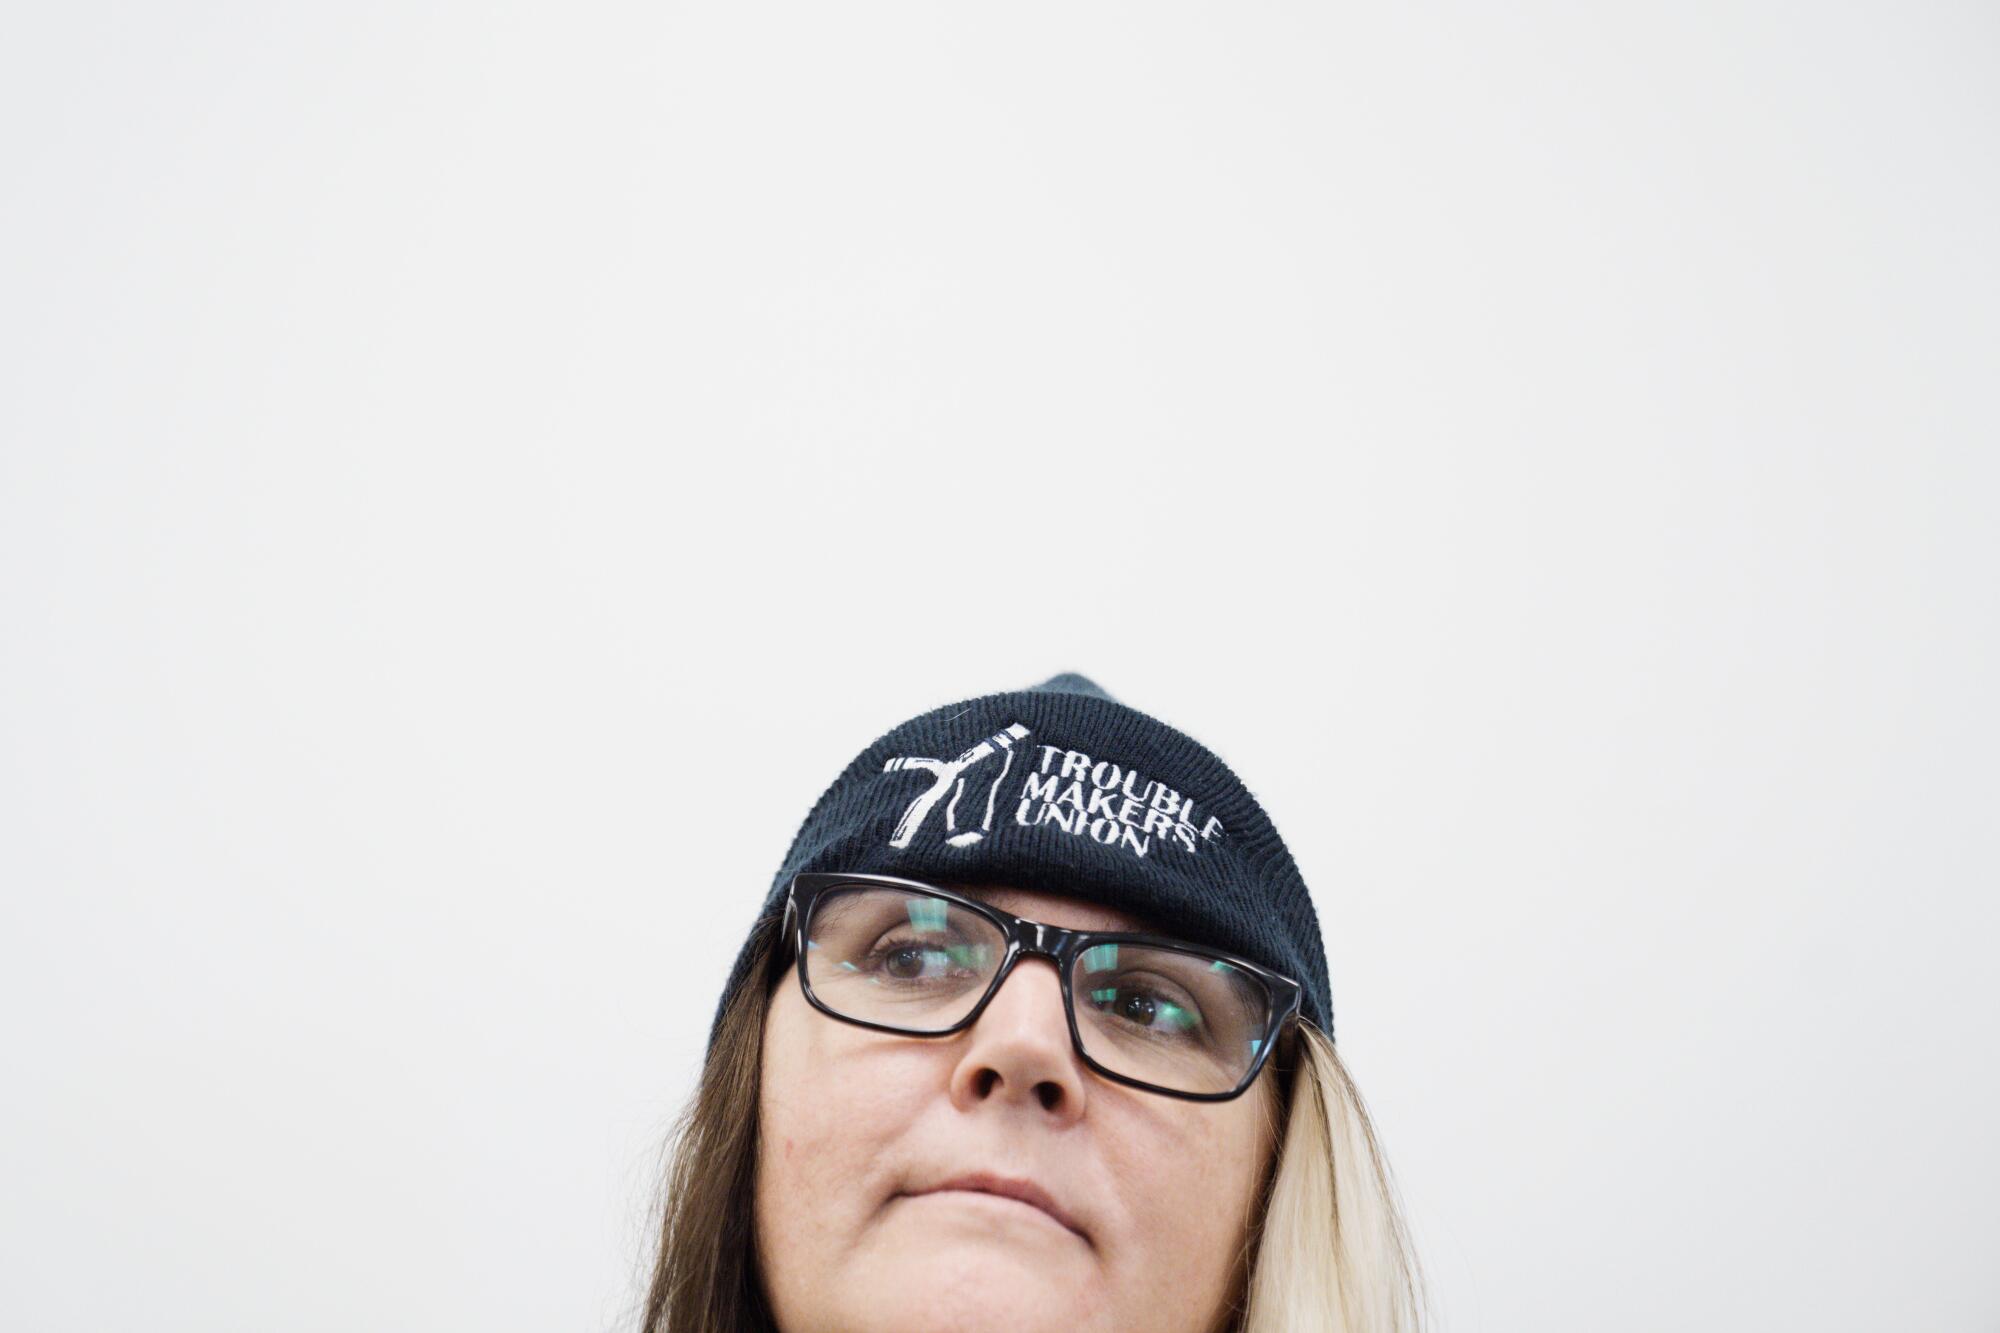 A woman is wearing glasses and a cap.